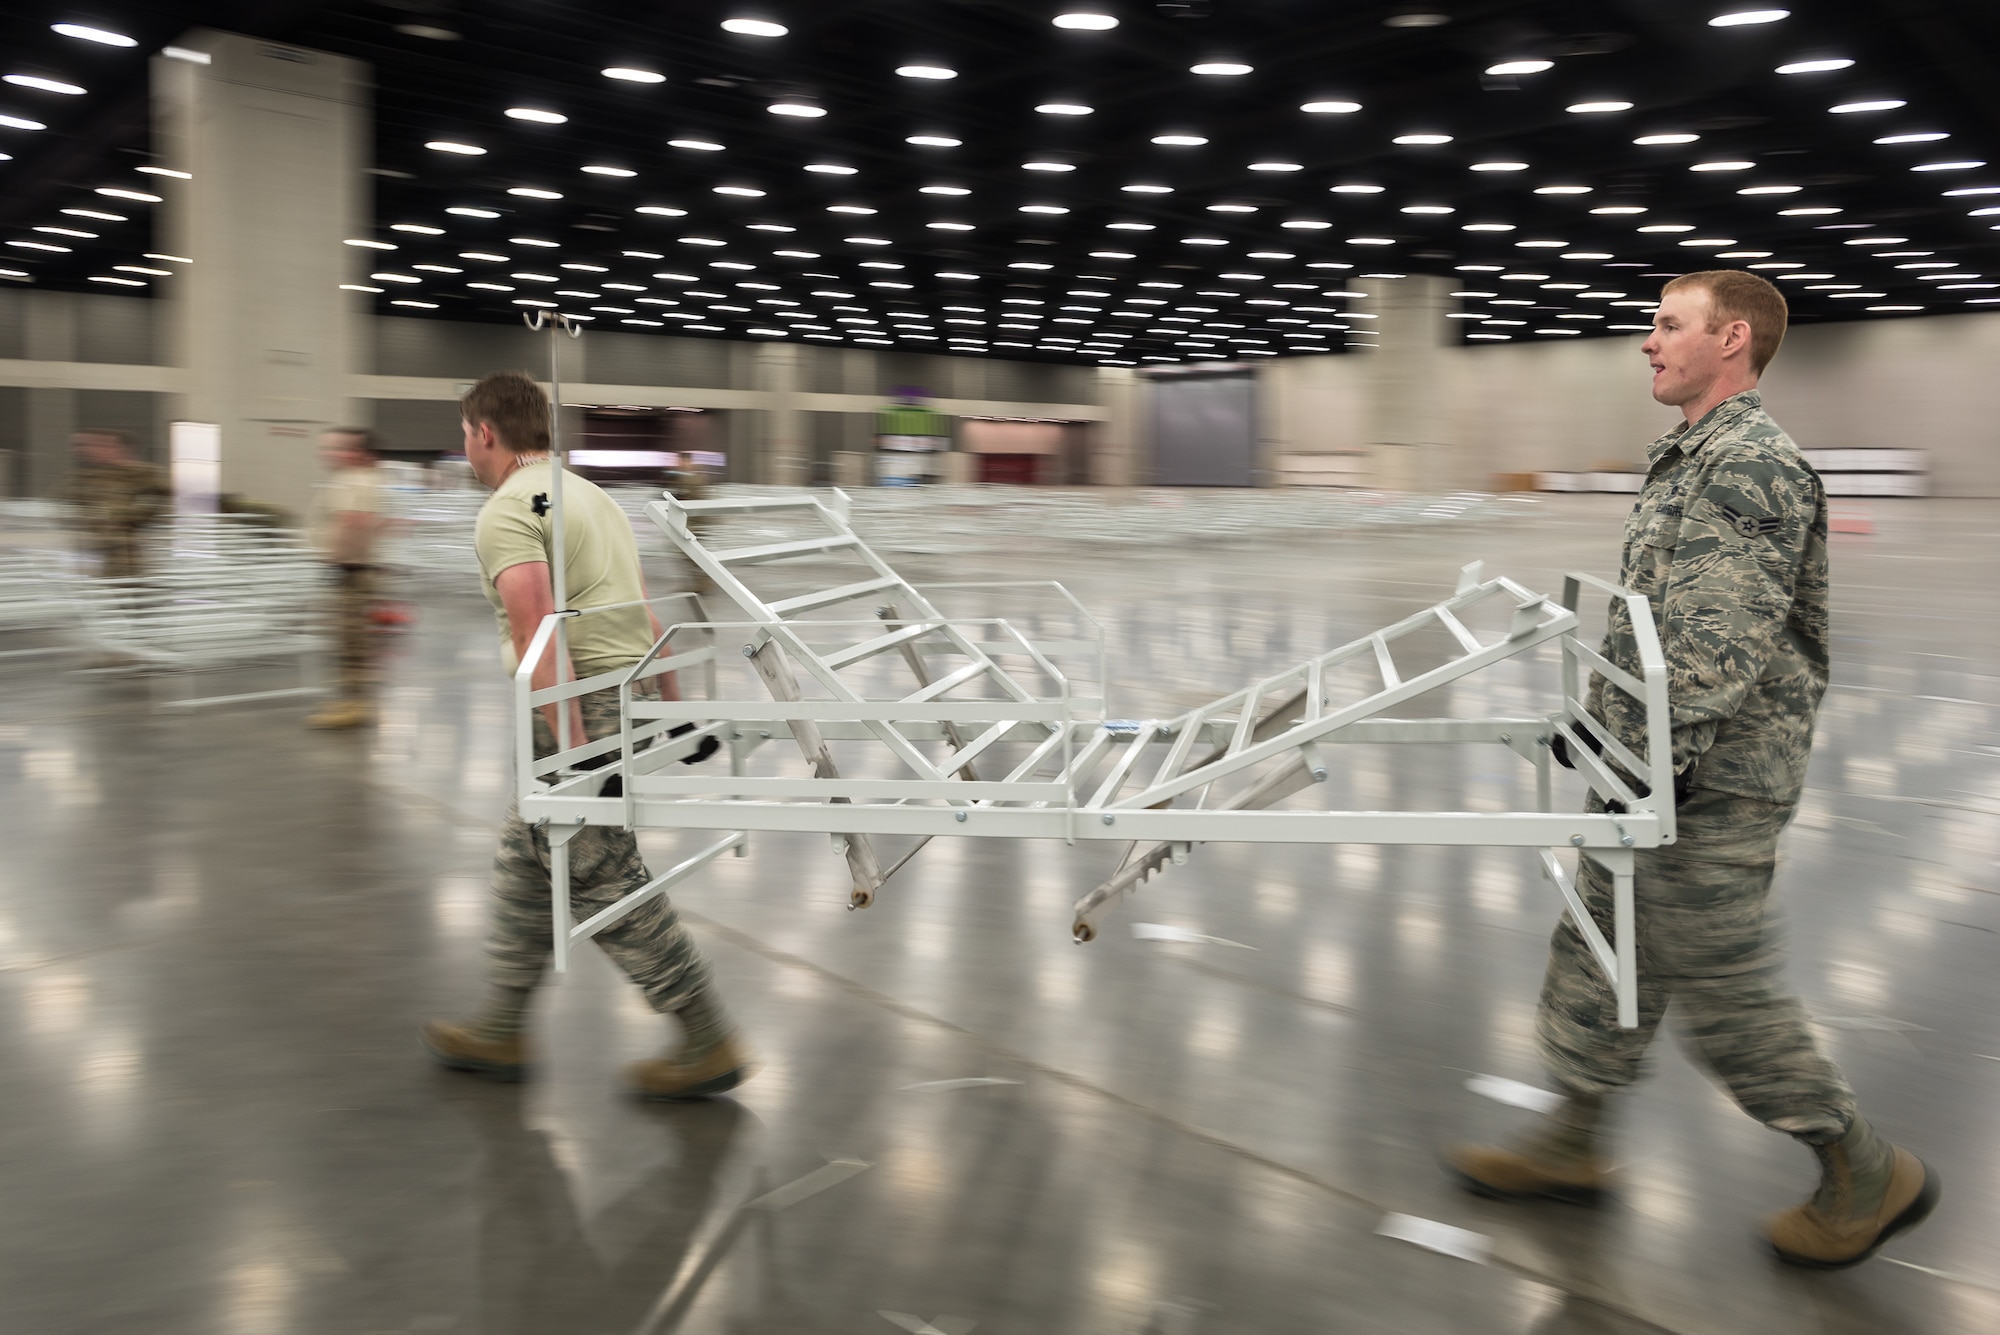 More than 30 members of the Kentucky Air National Guard’s 123rd Civil Engineer Squadron set up hospital beds and clinical space at the Kentucky Fair and Exposition Center in Louisville, Ky., April 11, 2020. The site, which is expected to be operational April 15, will serve as an Alternate Care Facility for patients suffering from COVID-19 if area hospitals exceed available capacity. The location initially can treat up to 288 patients and is scalable to 2,000 beds. (U.S. Air National Guard photo by Dale Greer)